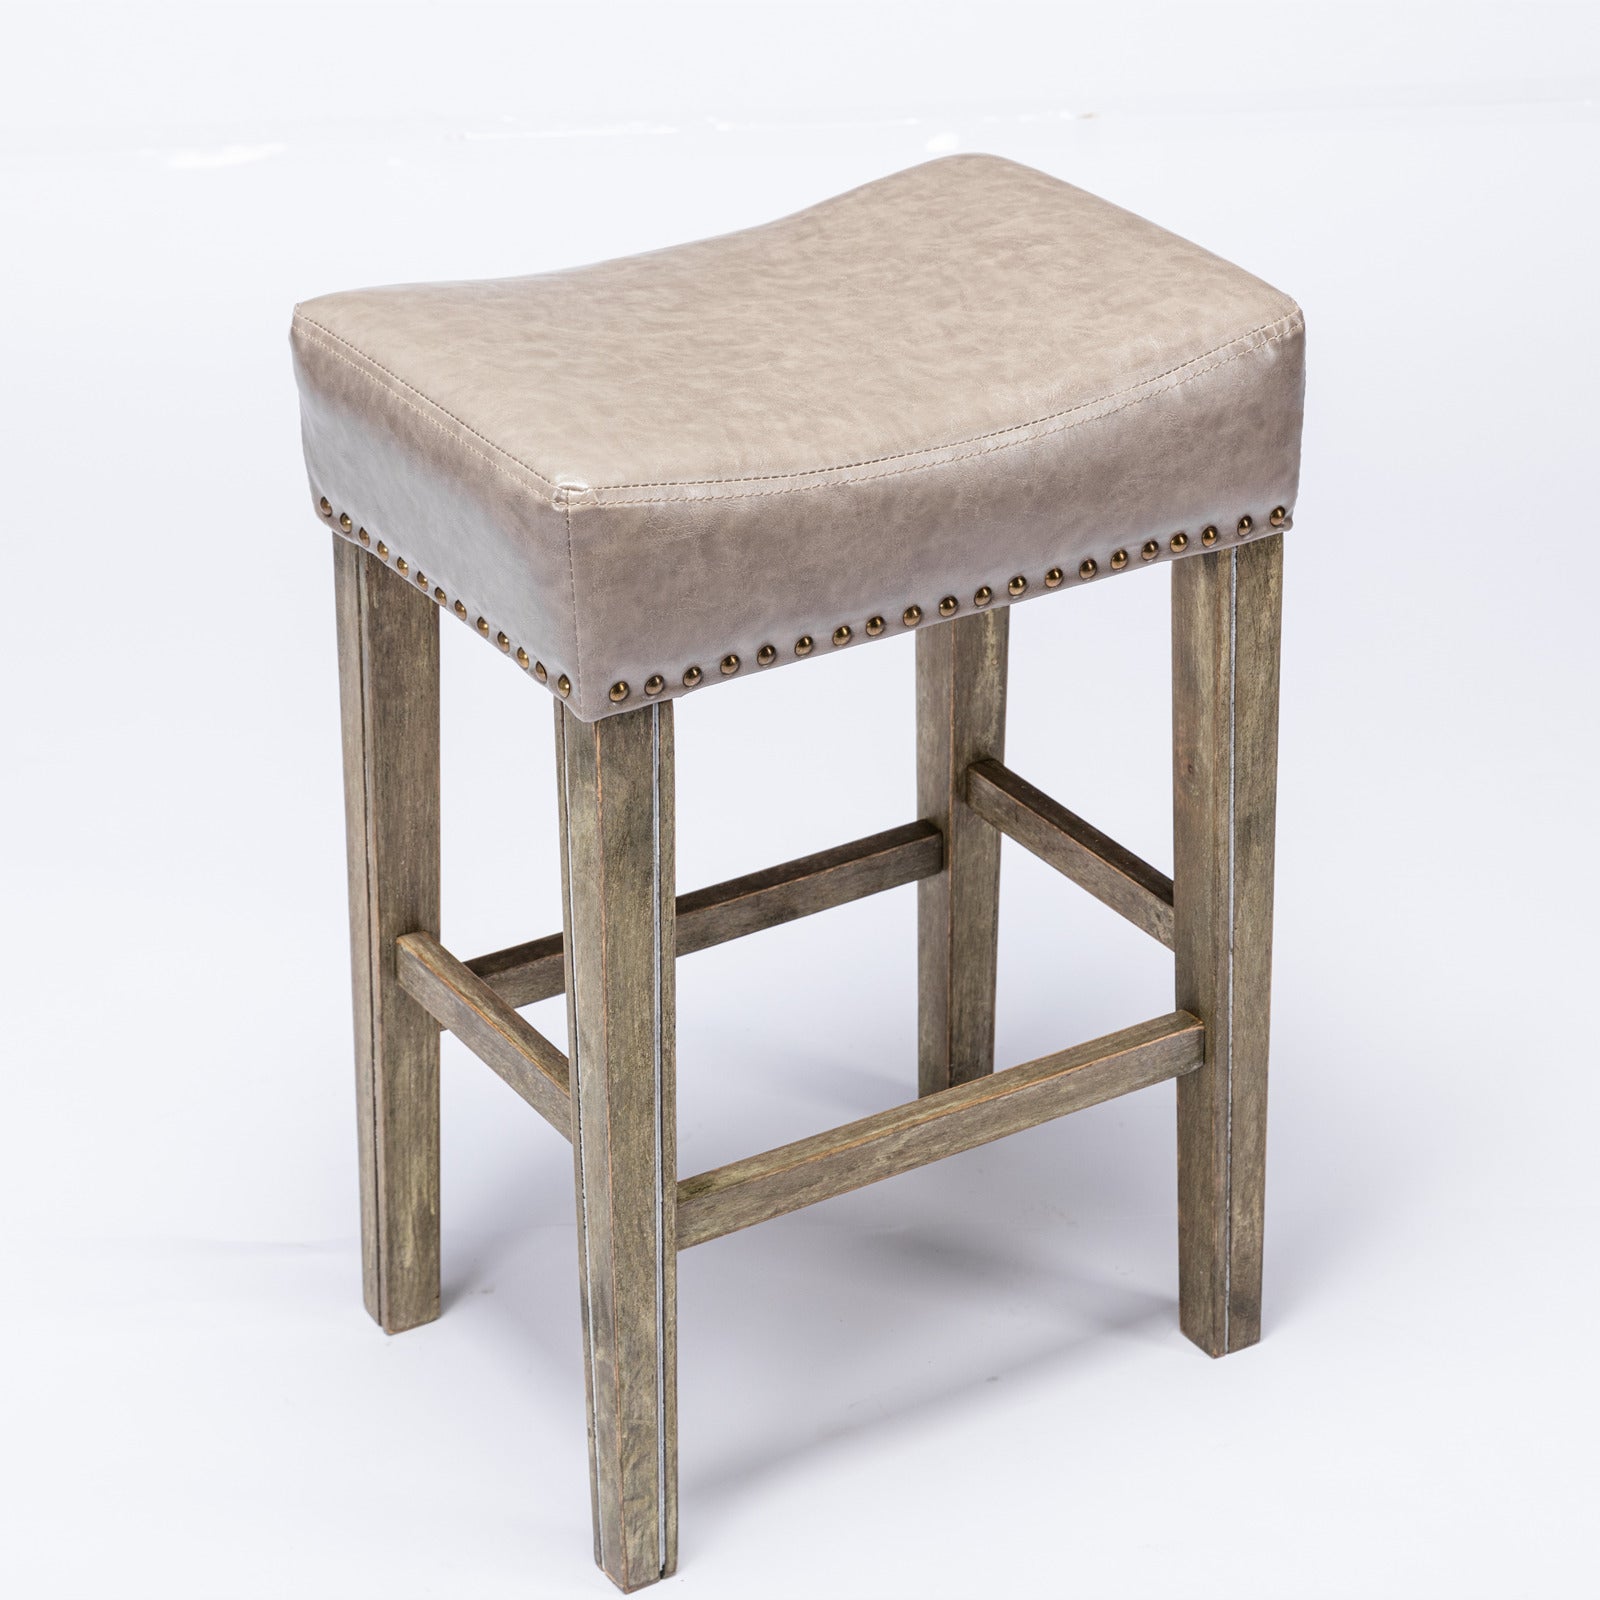 Set of 2 Gray Faux Leather Counter Stools with Wood Legs